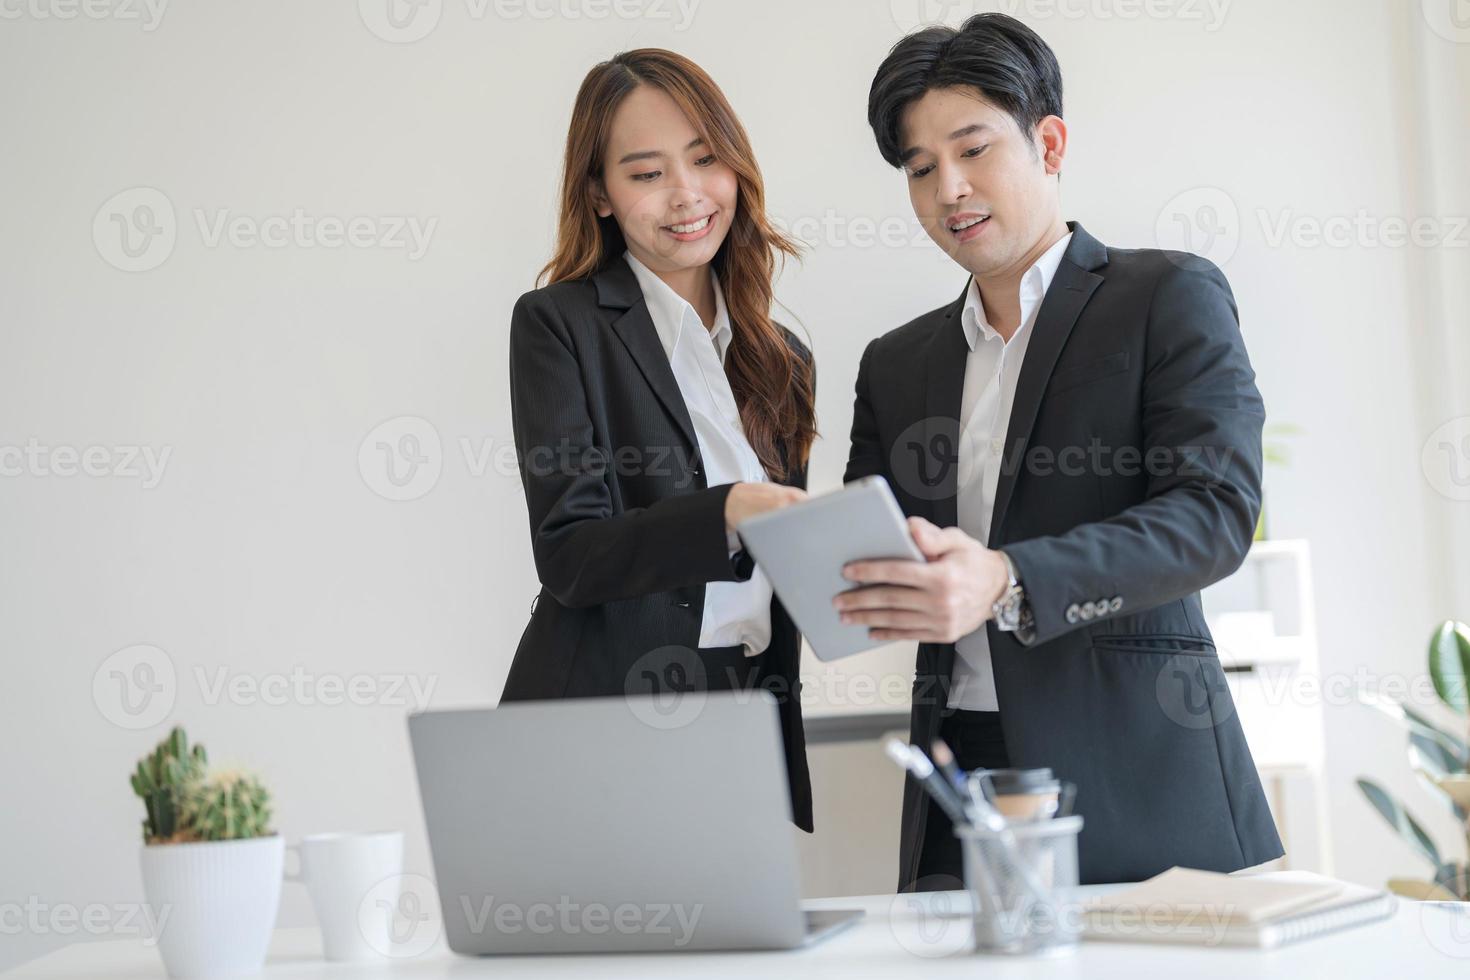 Business people stand together at a desk talking on their laptops photo